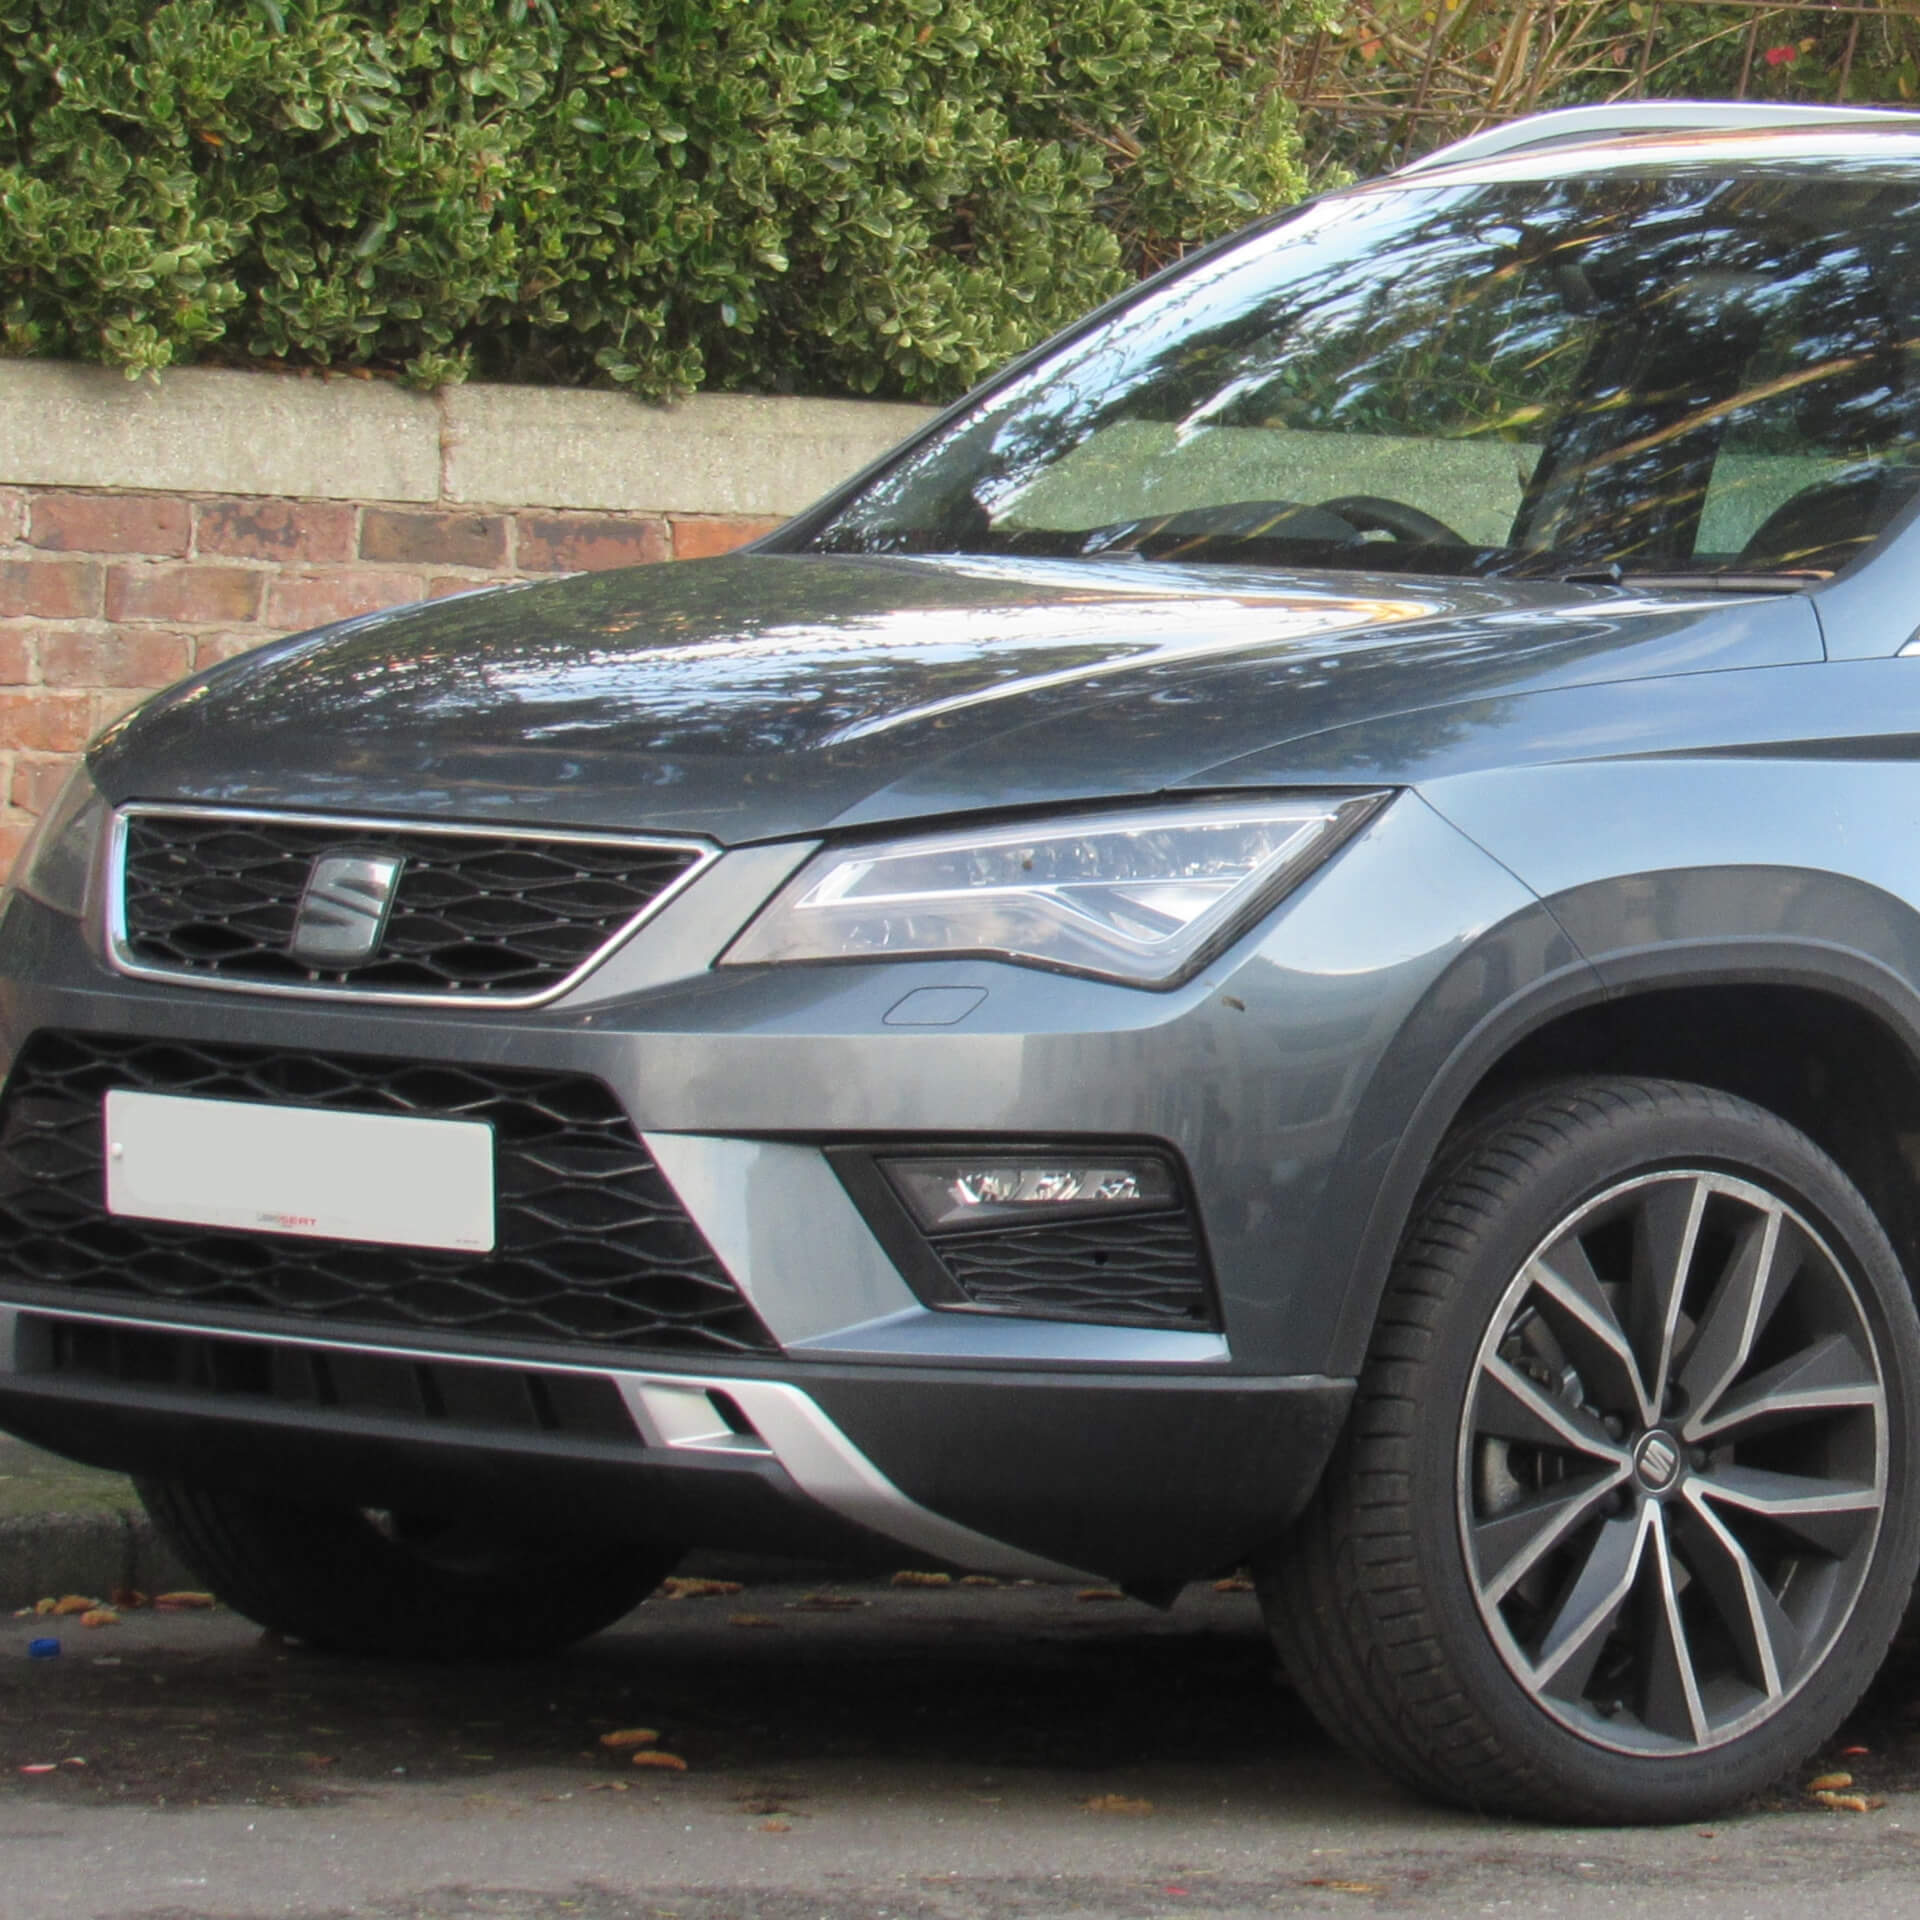 Direct4x4 accessories for Seat Ateca vehicles with a photo of a grey Seat Ateca parked next to a brick wall